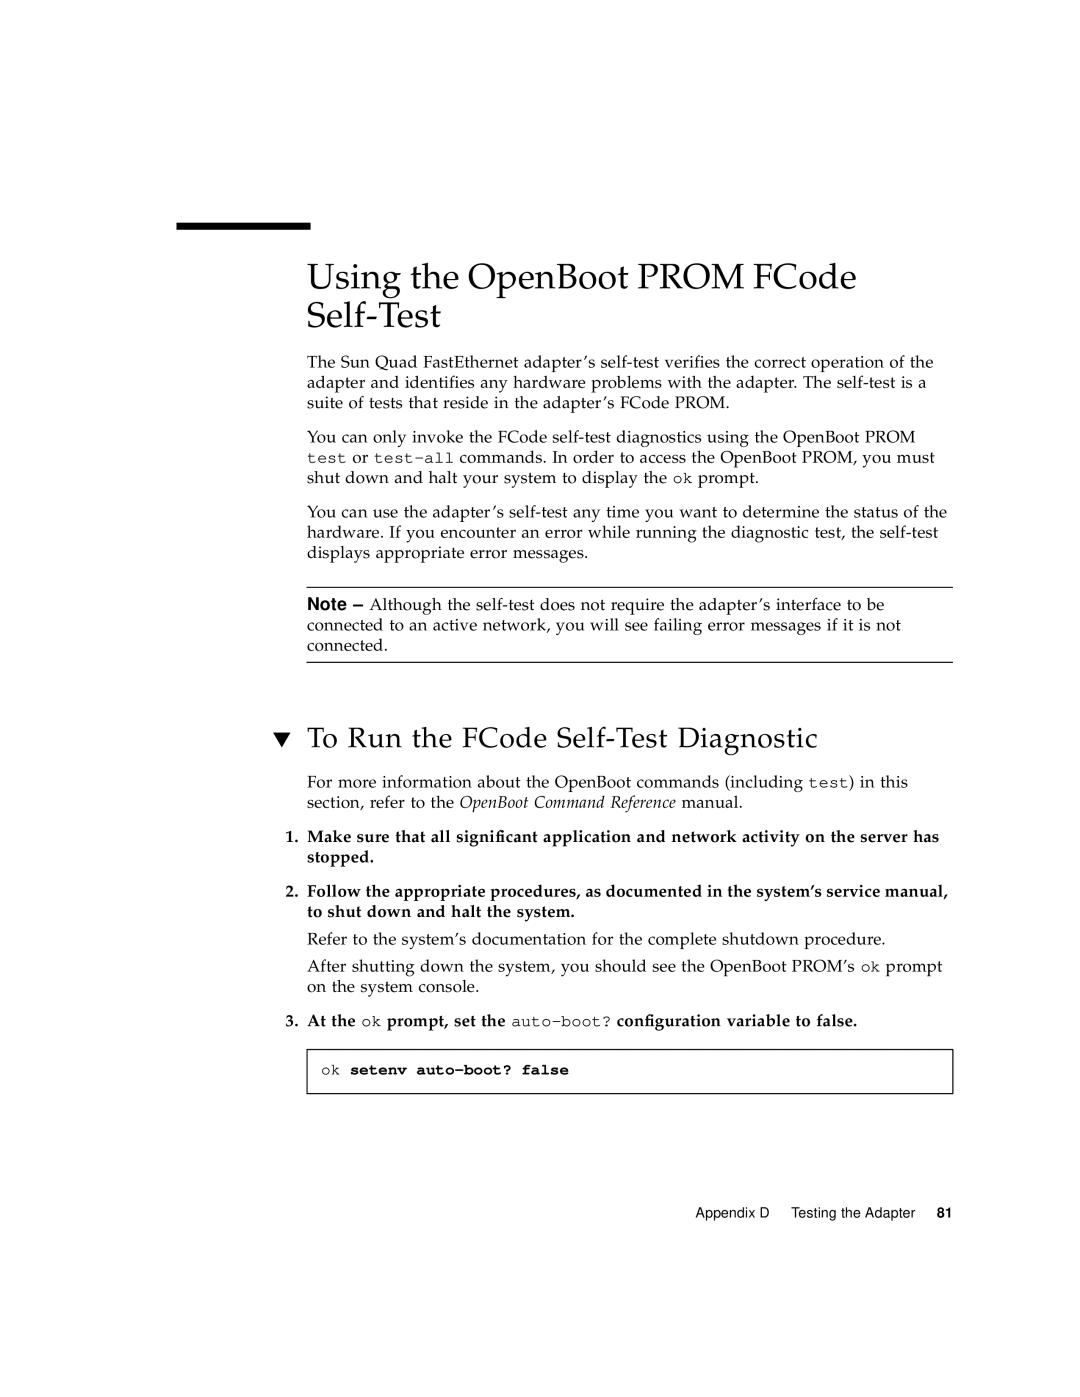 Sun Microsystems 6U manual Using the OpenBoot PROM FCode Self-Test, To Run the FCode Self-Test Diagnostic 